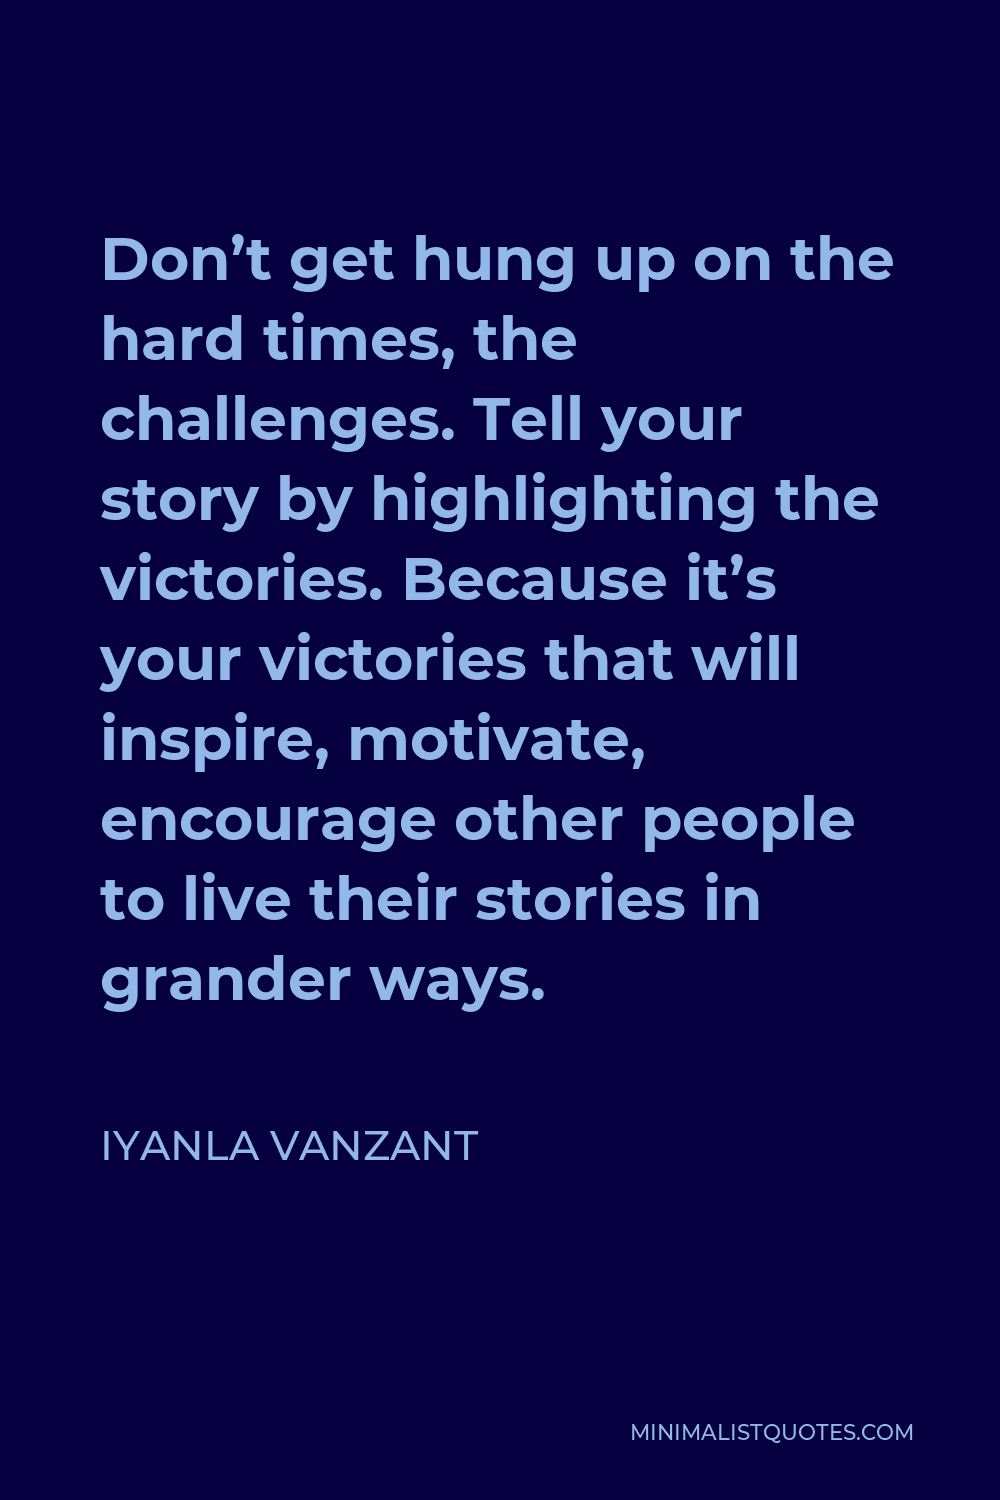 Iyanla Vanzant Quote - Don’t get hung up on the hard times, the challenges. Tell your story by highlighting the victories. Because it’s your victories that will inspire, motivate, encourage other people to live their stories in grander ways.